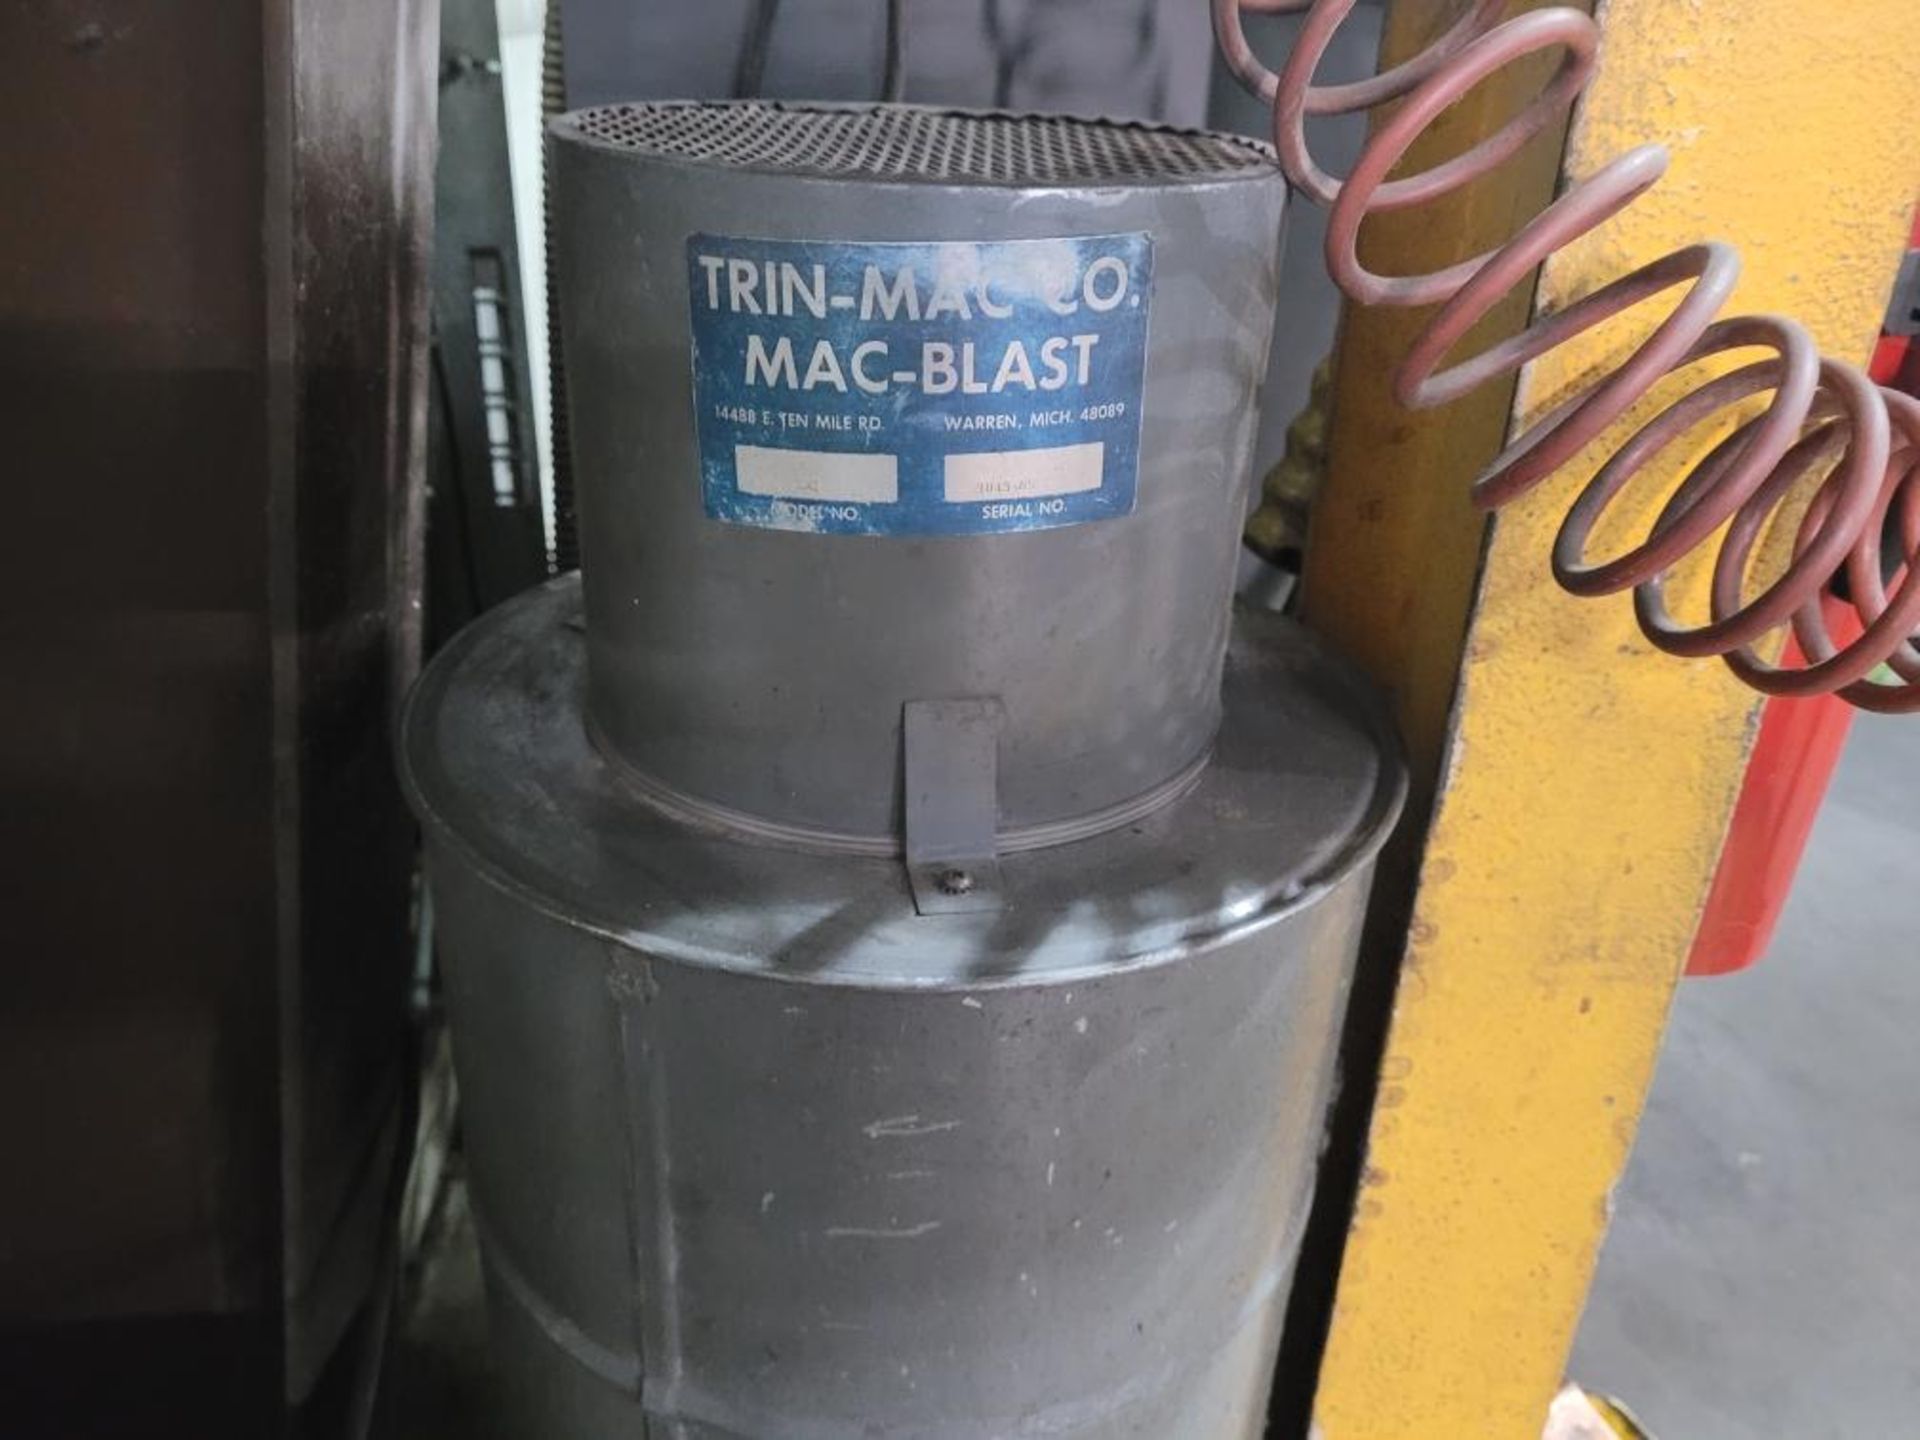 Trinco Model 36x24 DC Dry Blast Cabinet, S/N: 3043-85; with Trin-Mac Model DC Dust Collector S/N: - Image 3 of 3